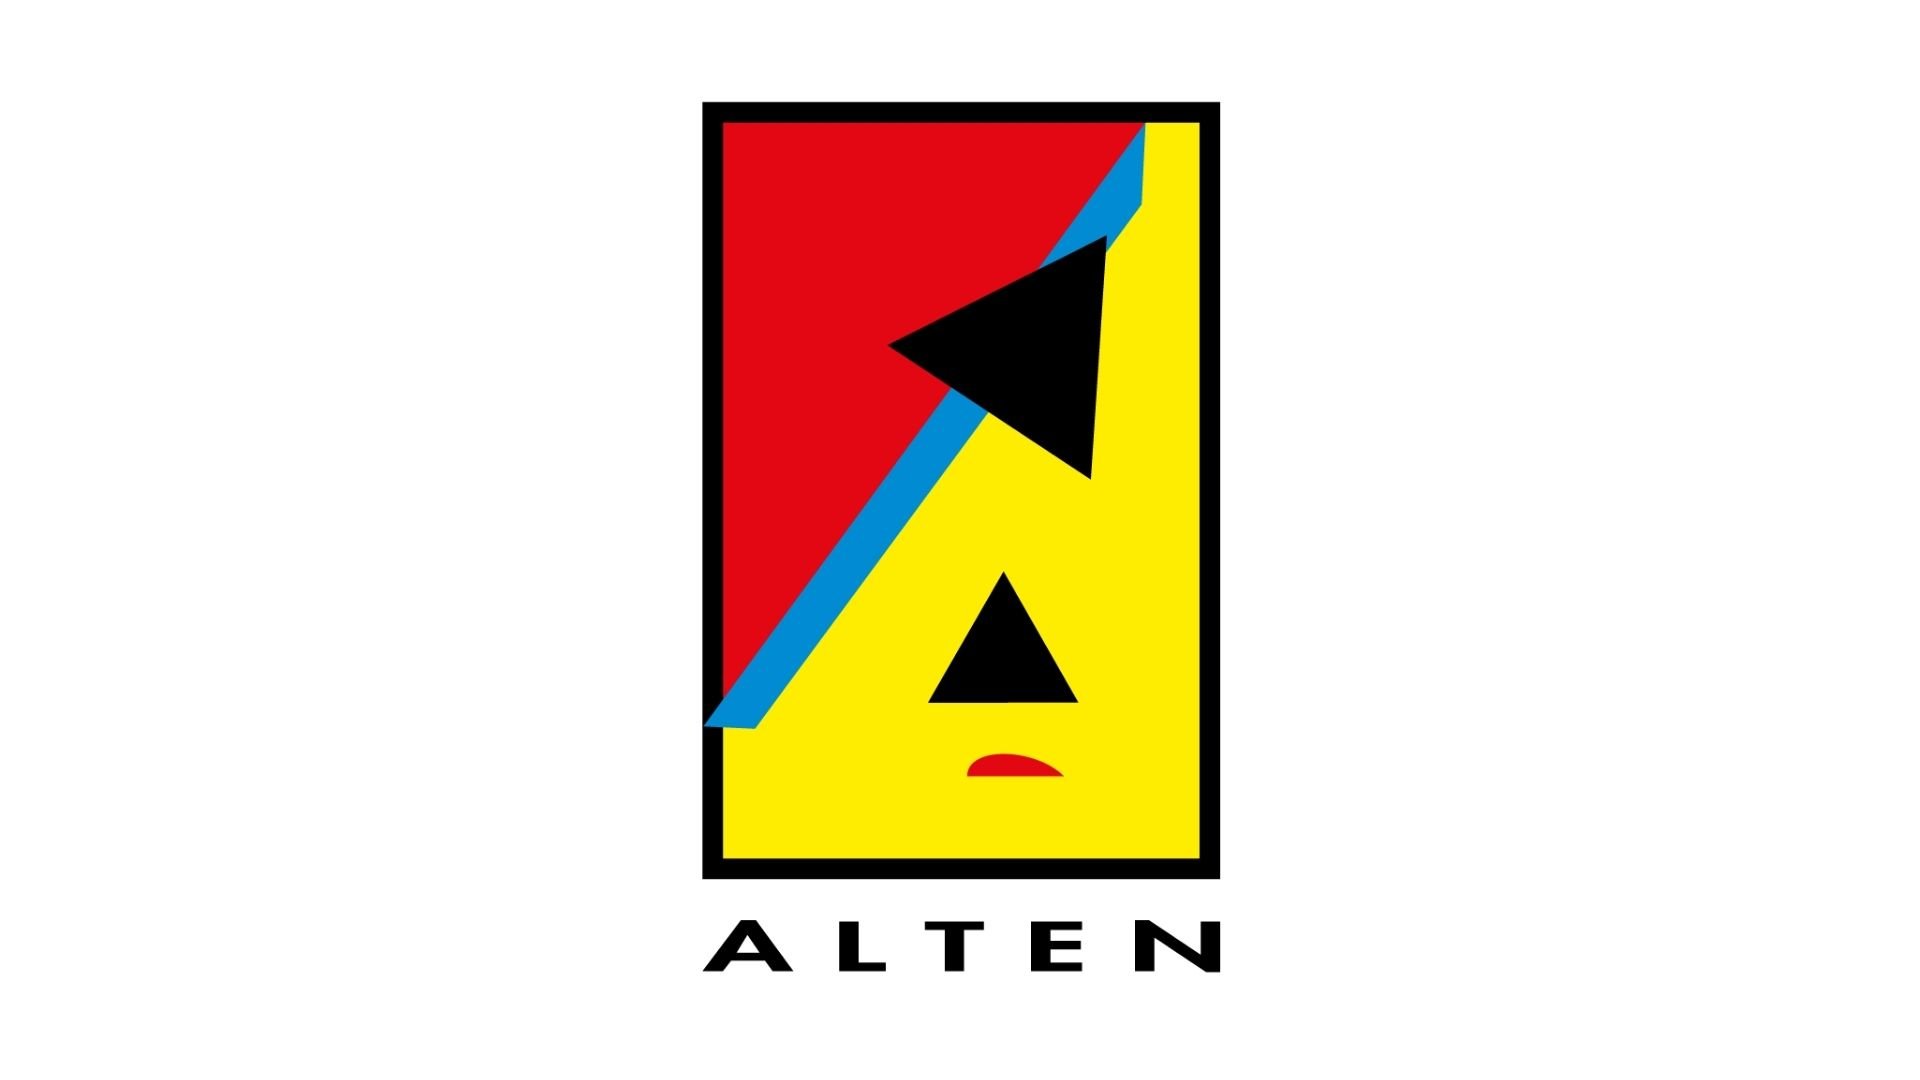 ALTEN Group - one of the global engineering and technology market's leaders